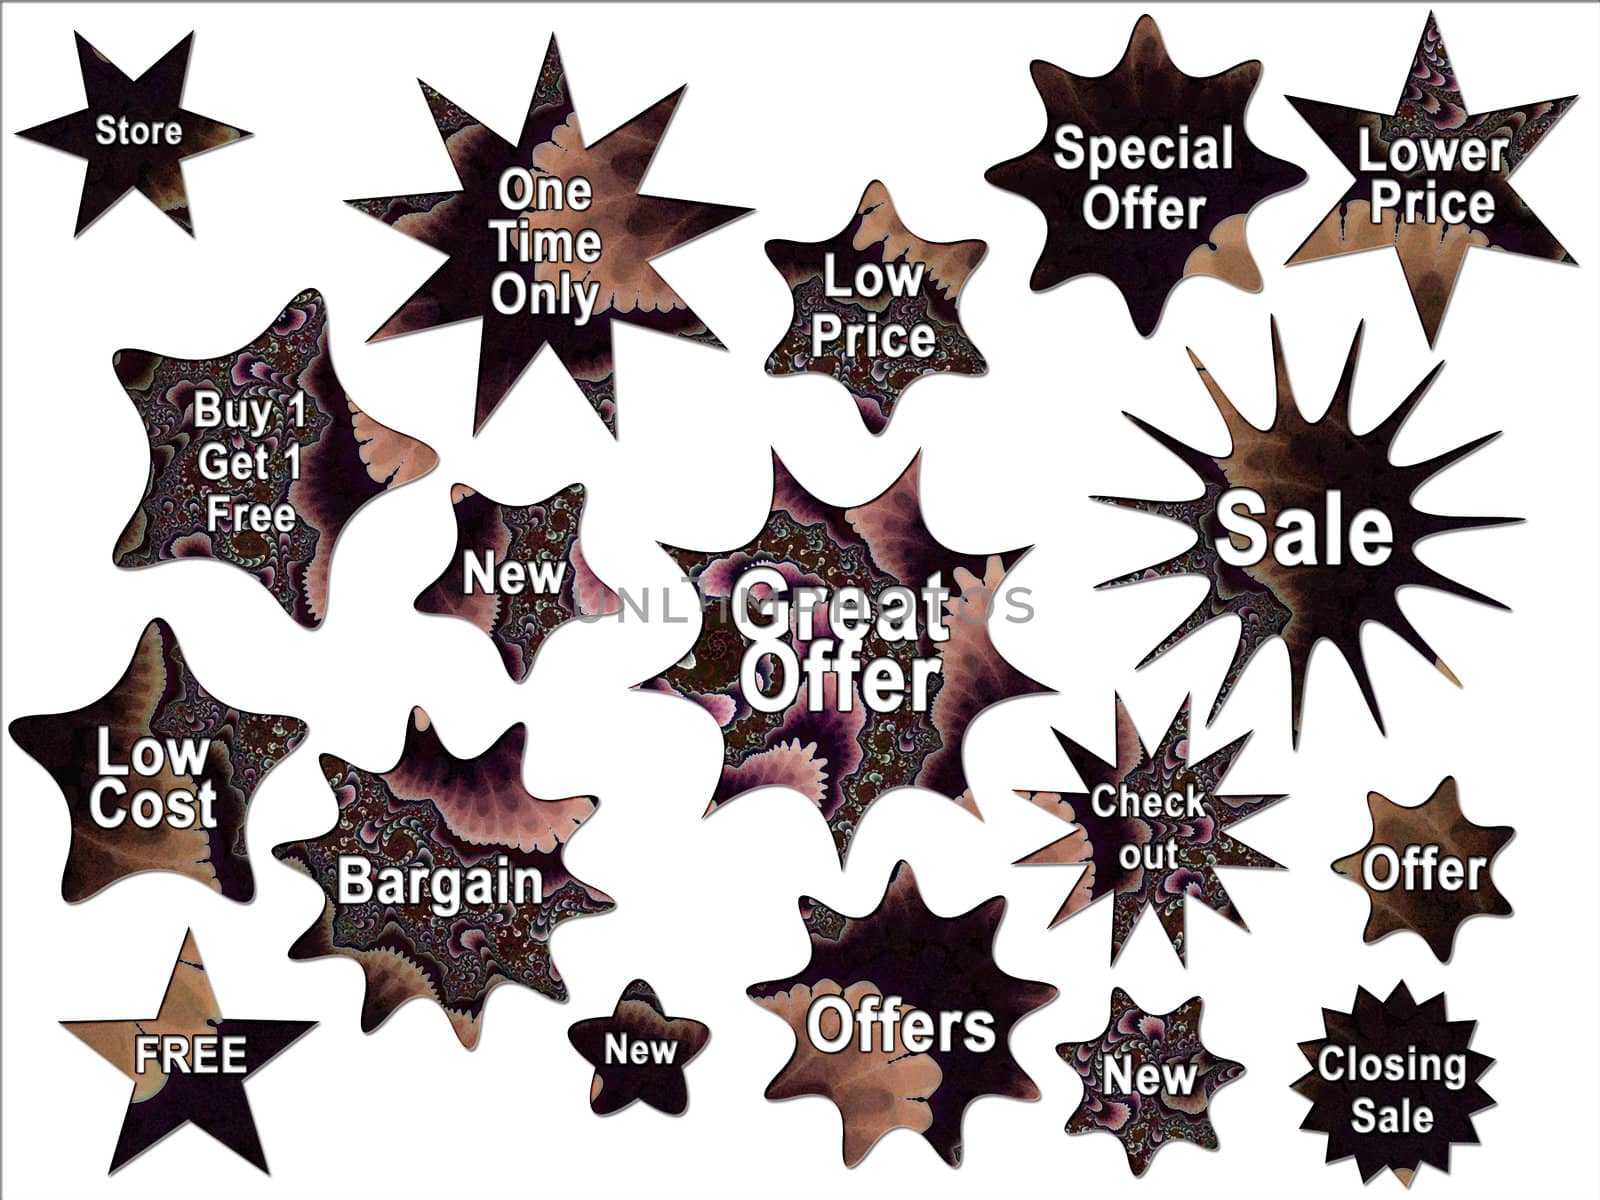 Retro 50s Style Brown Special Offer Tags and Star Stickers by bobbigmac